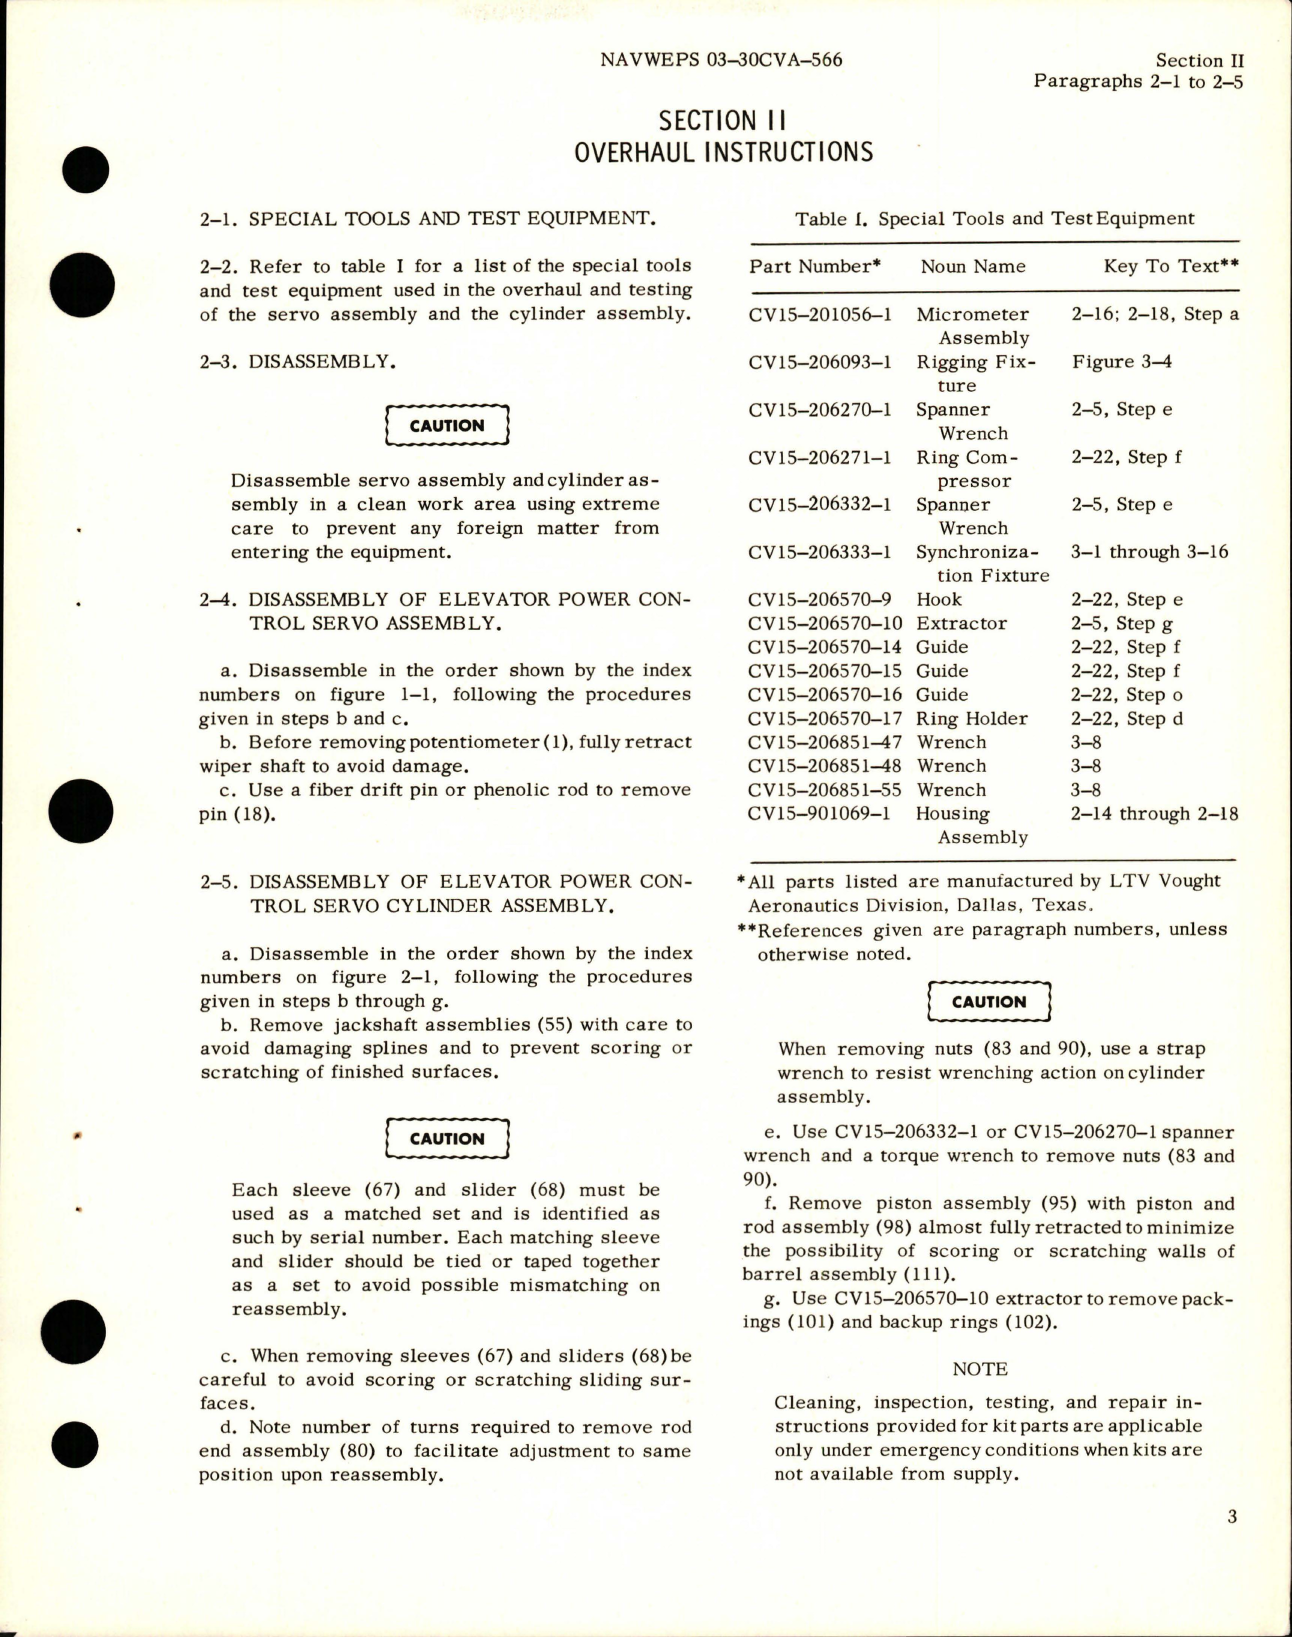 Sample page 7 from AirCorps Library document: Overhaul Instructions for Elevator (Horizontal Tail) Power Control Servo and Servo Cylinder Assembly